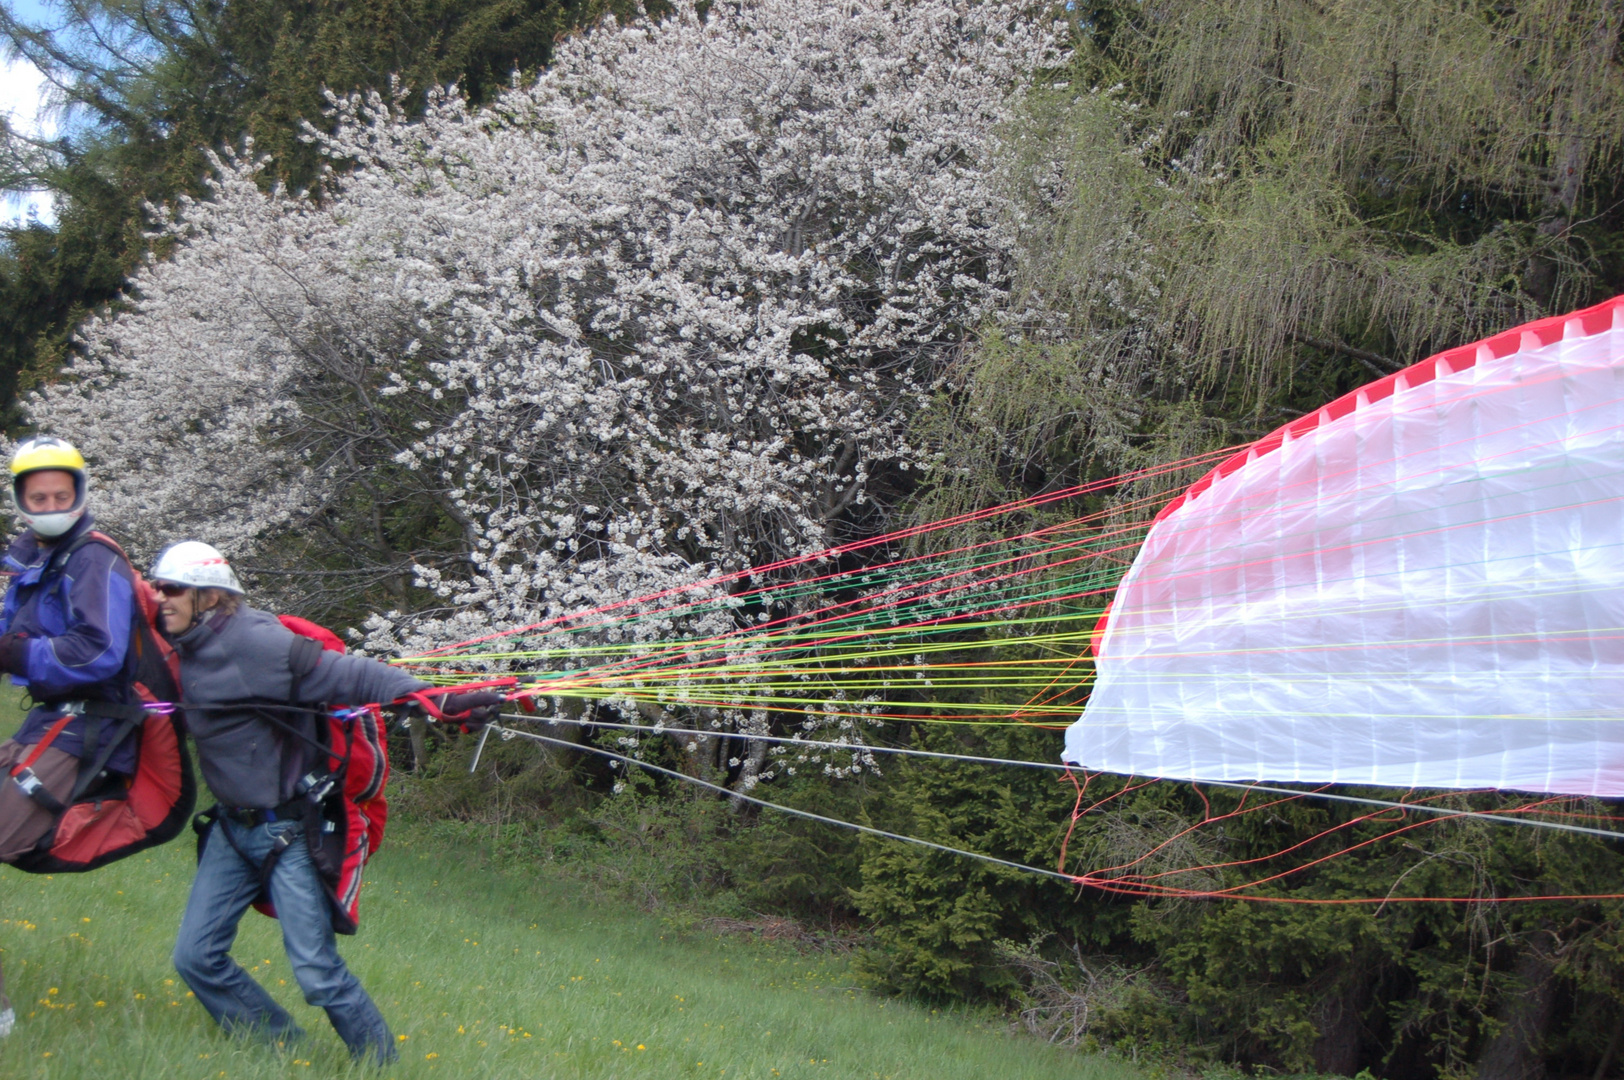 Paragliding in Spring